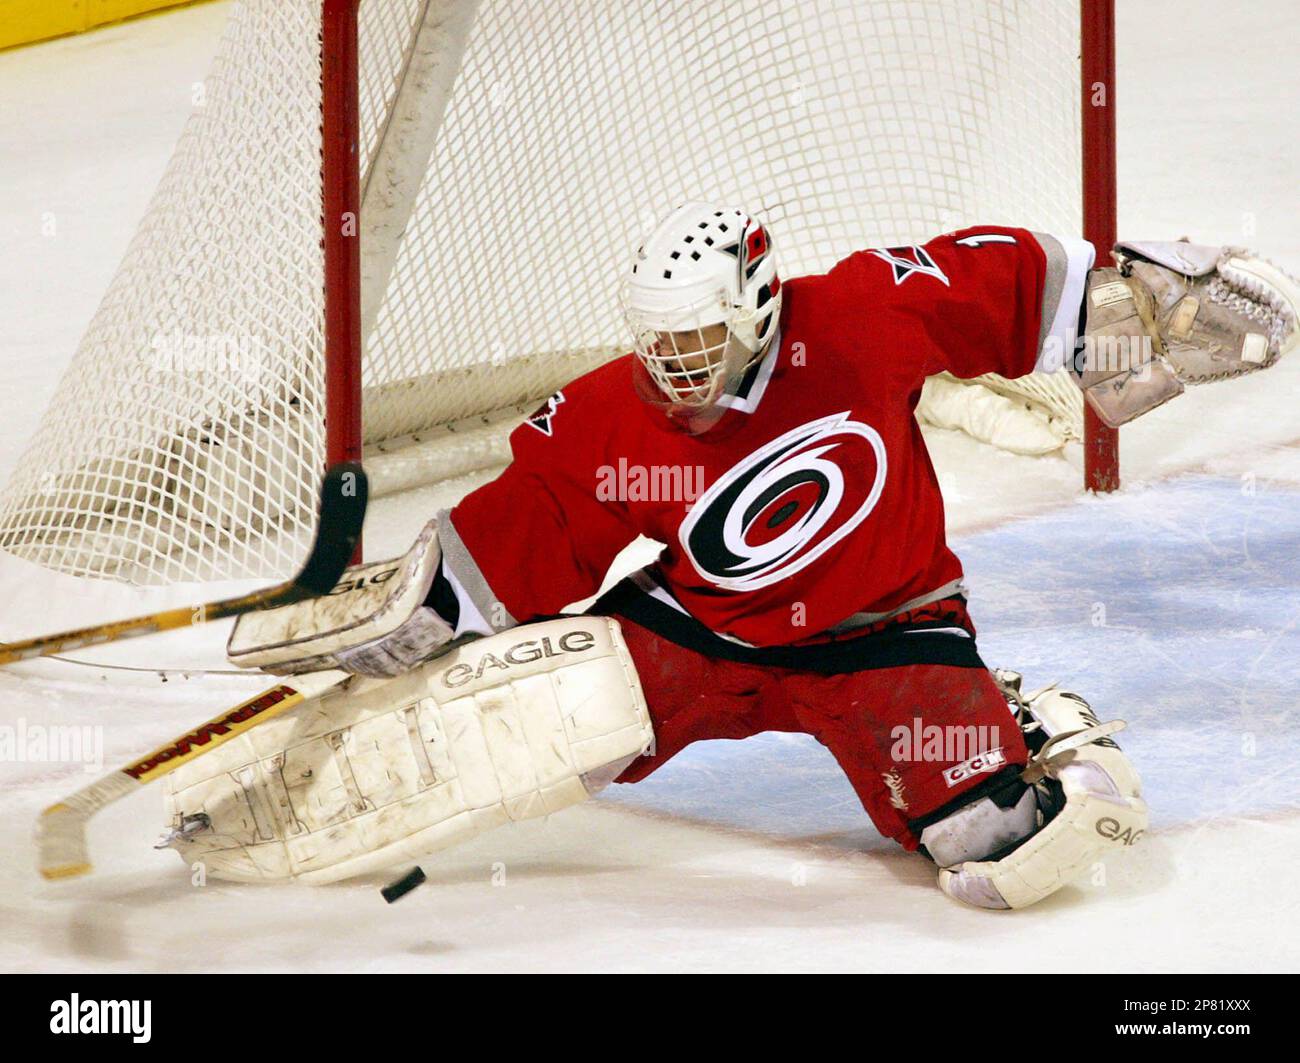 ** ADVANCE FOR WEEKEND EDITIONS, SEPT. 26-27 ** FILE - In this Nov. 23, 2002, file photo, Carolina Hurricanes' goalie Arturs Irbe makes a save against the Montreal Canadiens during first period NHL action in Montreal. Long before everyone started calling him Archie, Arturs Irbe came to North America with only a few words of English in his vocabulary. Now that he's retired after a successful career as a goaltender, Irbe is back in the States, teaching the same basic words to Washington Capitals up-and-comer Semyon Varlamov.(AP Photo/The Canadian Press, Andre Forget, File) Stock Photo